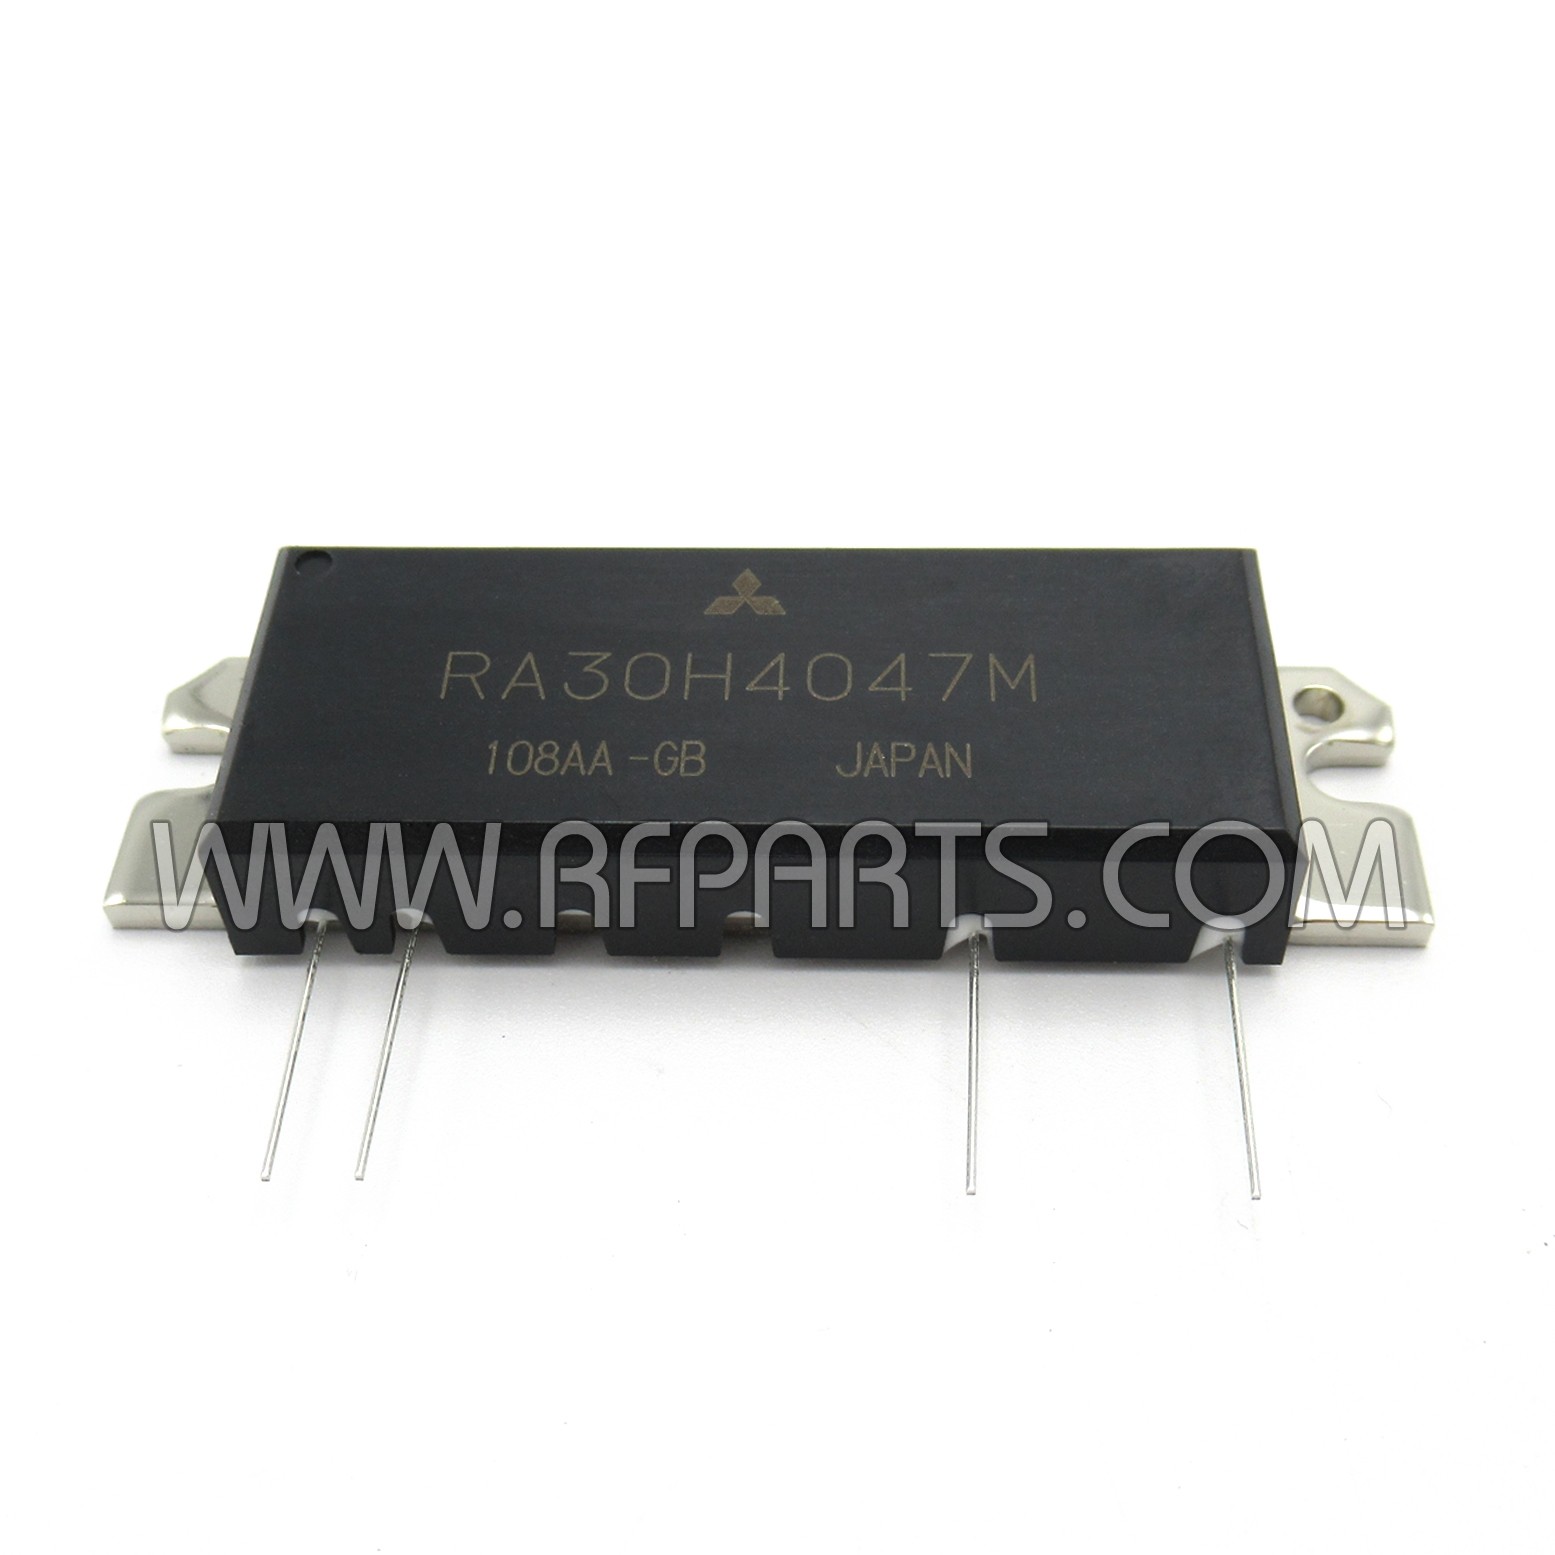 1pcs Mitsubishi RA30H4047M Power Supply Module Quality Assurance for sale online 